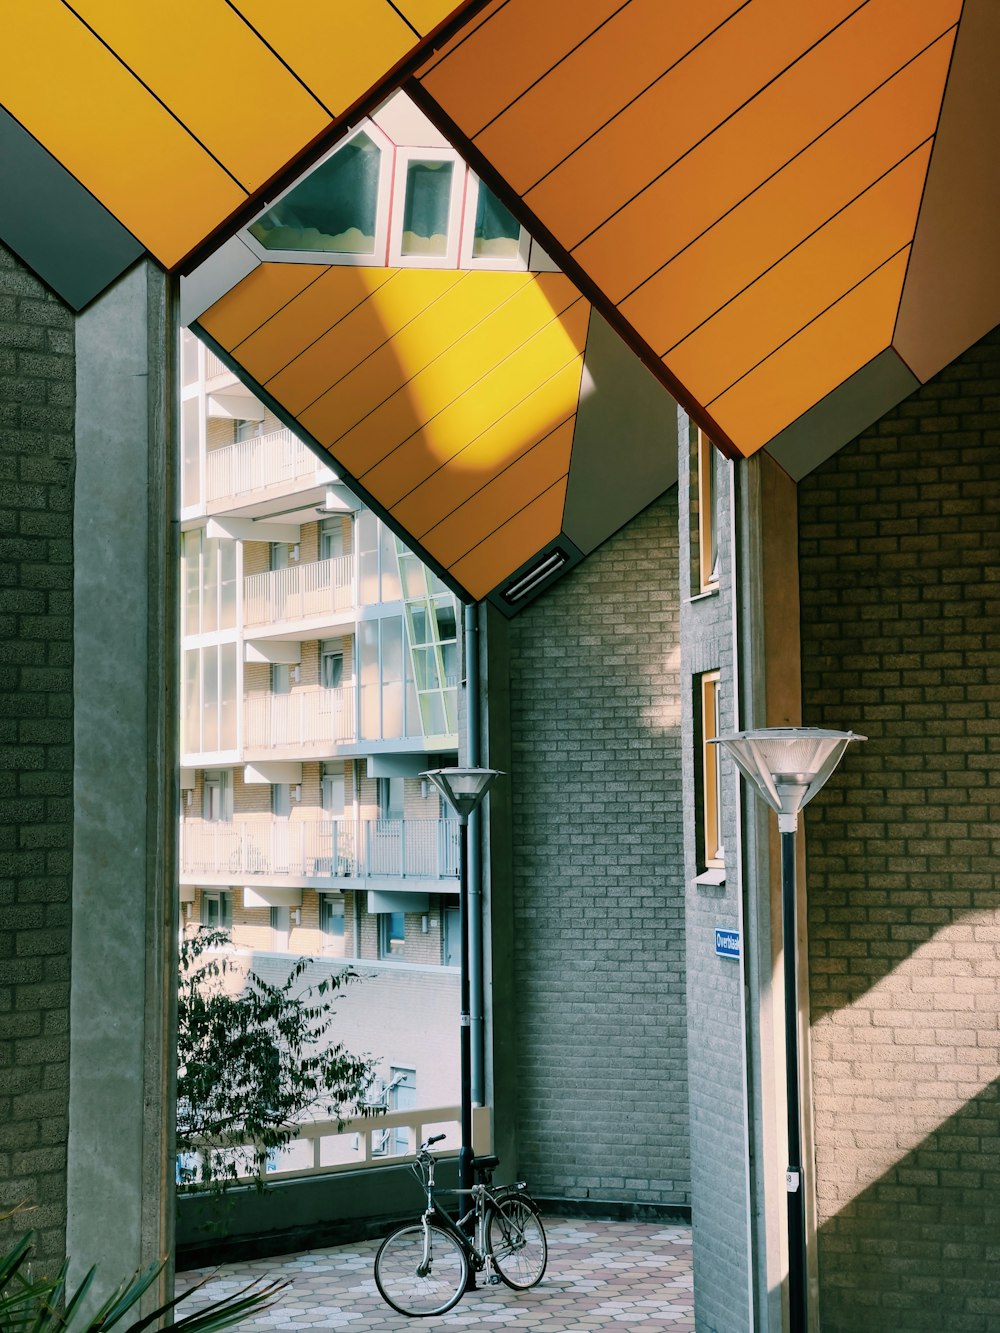 a bike parked under a yellow umbrella next to a building